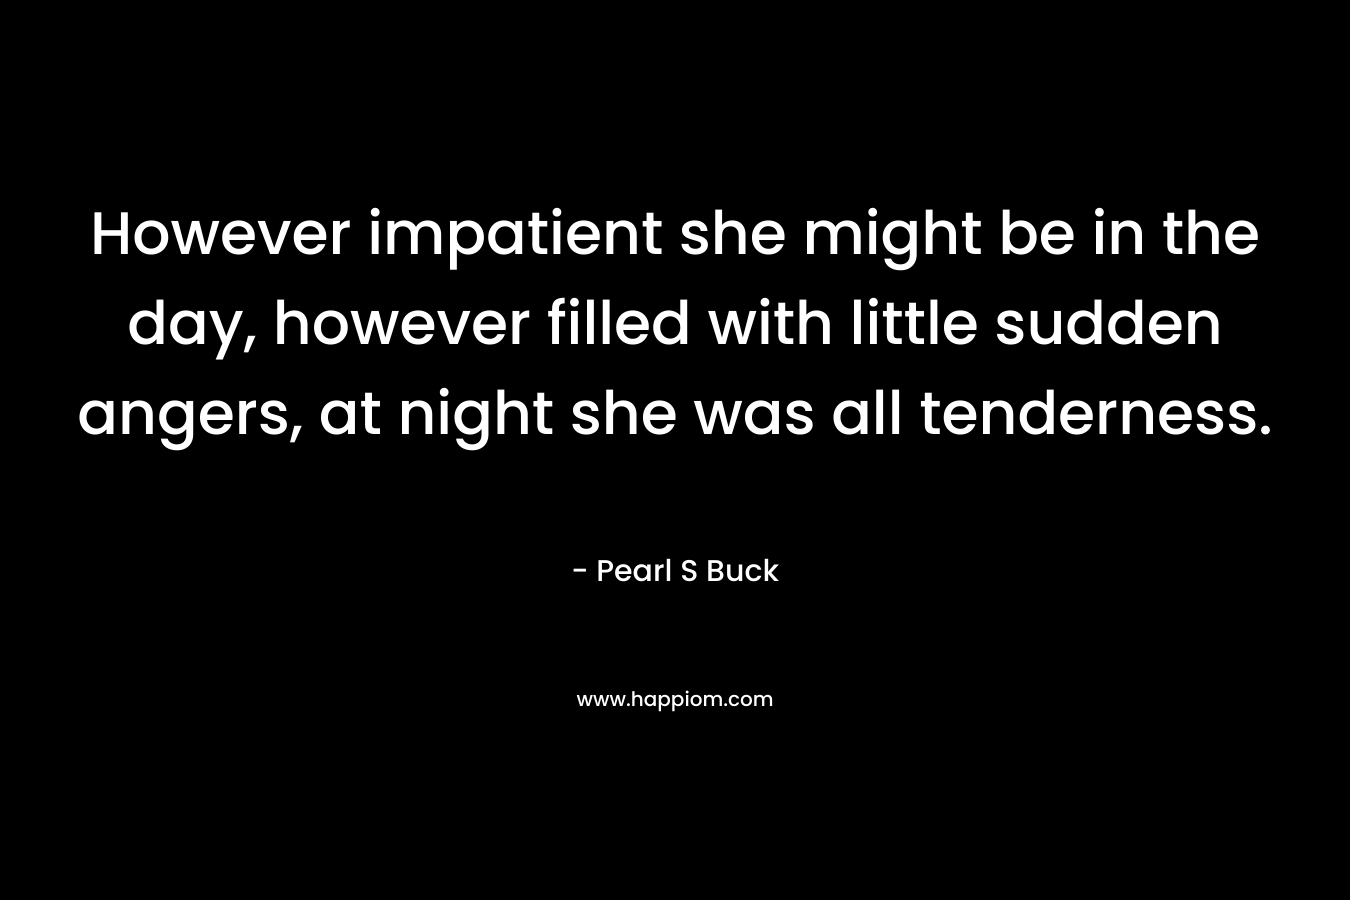 However impatient she might be in the day, however filled with little sudden angers, at night she was all tenderness. – Pearl S Buck